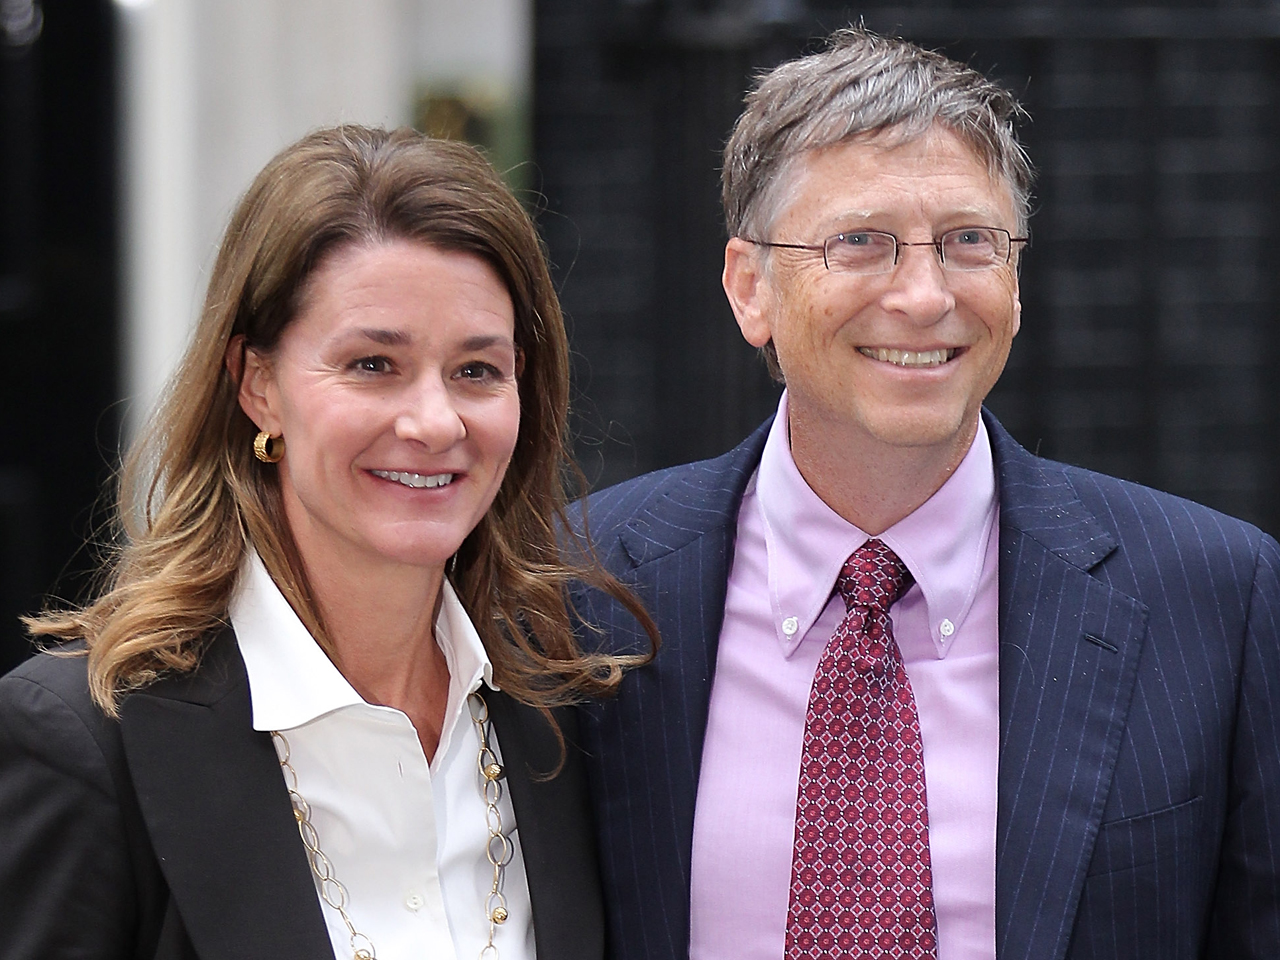 Bill Gates recalls his 'spontaneous' first date with wife